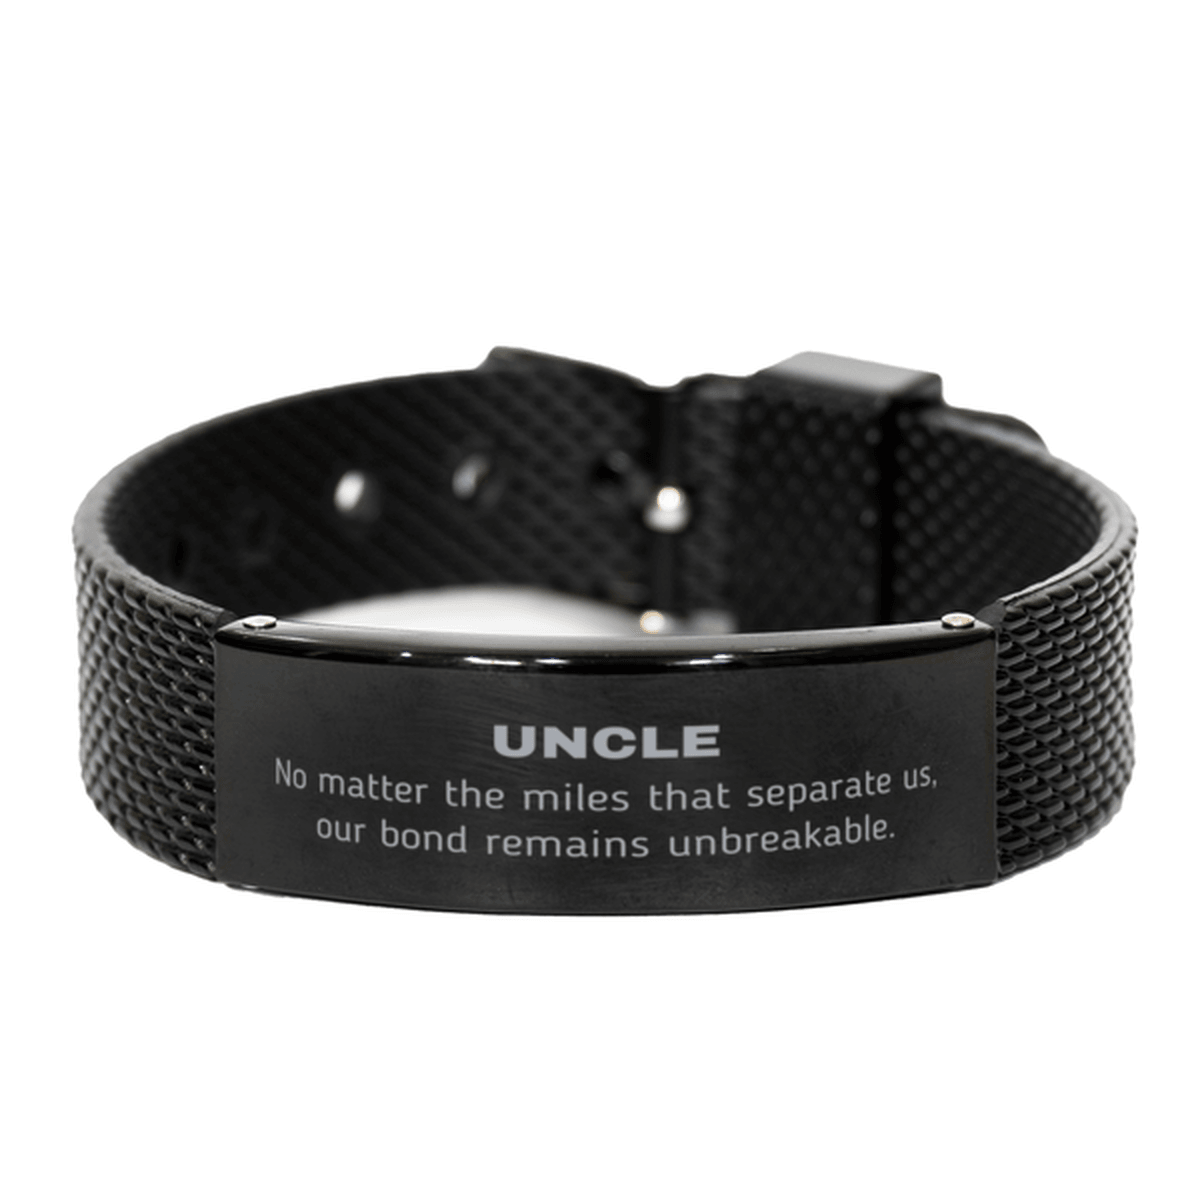 Uncle Long Distance Relationship Gifts, No matter the miles that separate us, Cute Love Black Shark Mesh Bracelet For Uncle, Birthday Christmas Unique Gifts For Uncle - Mallard Moon Gift Shop